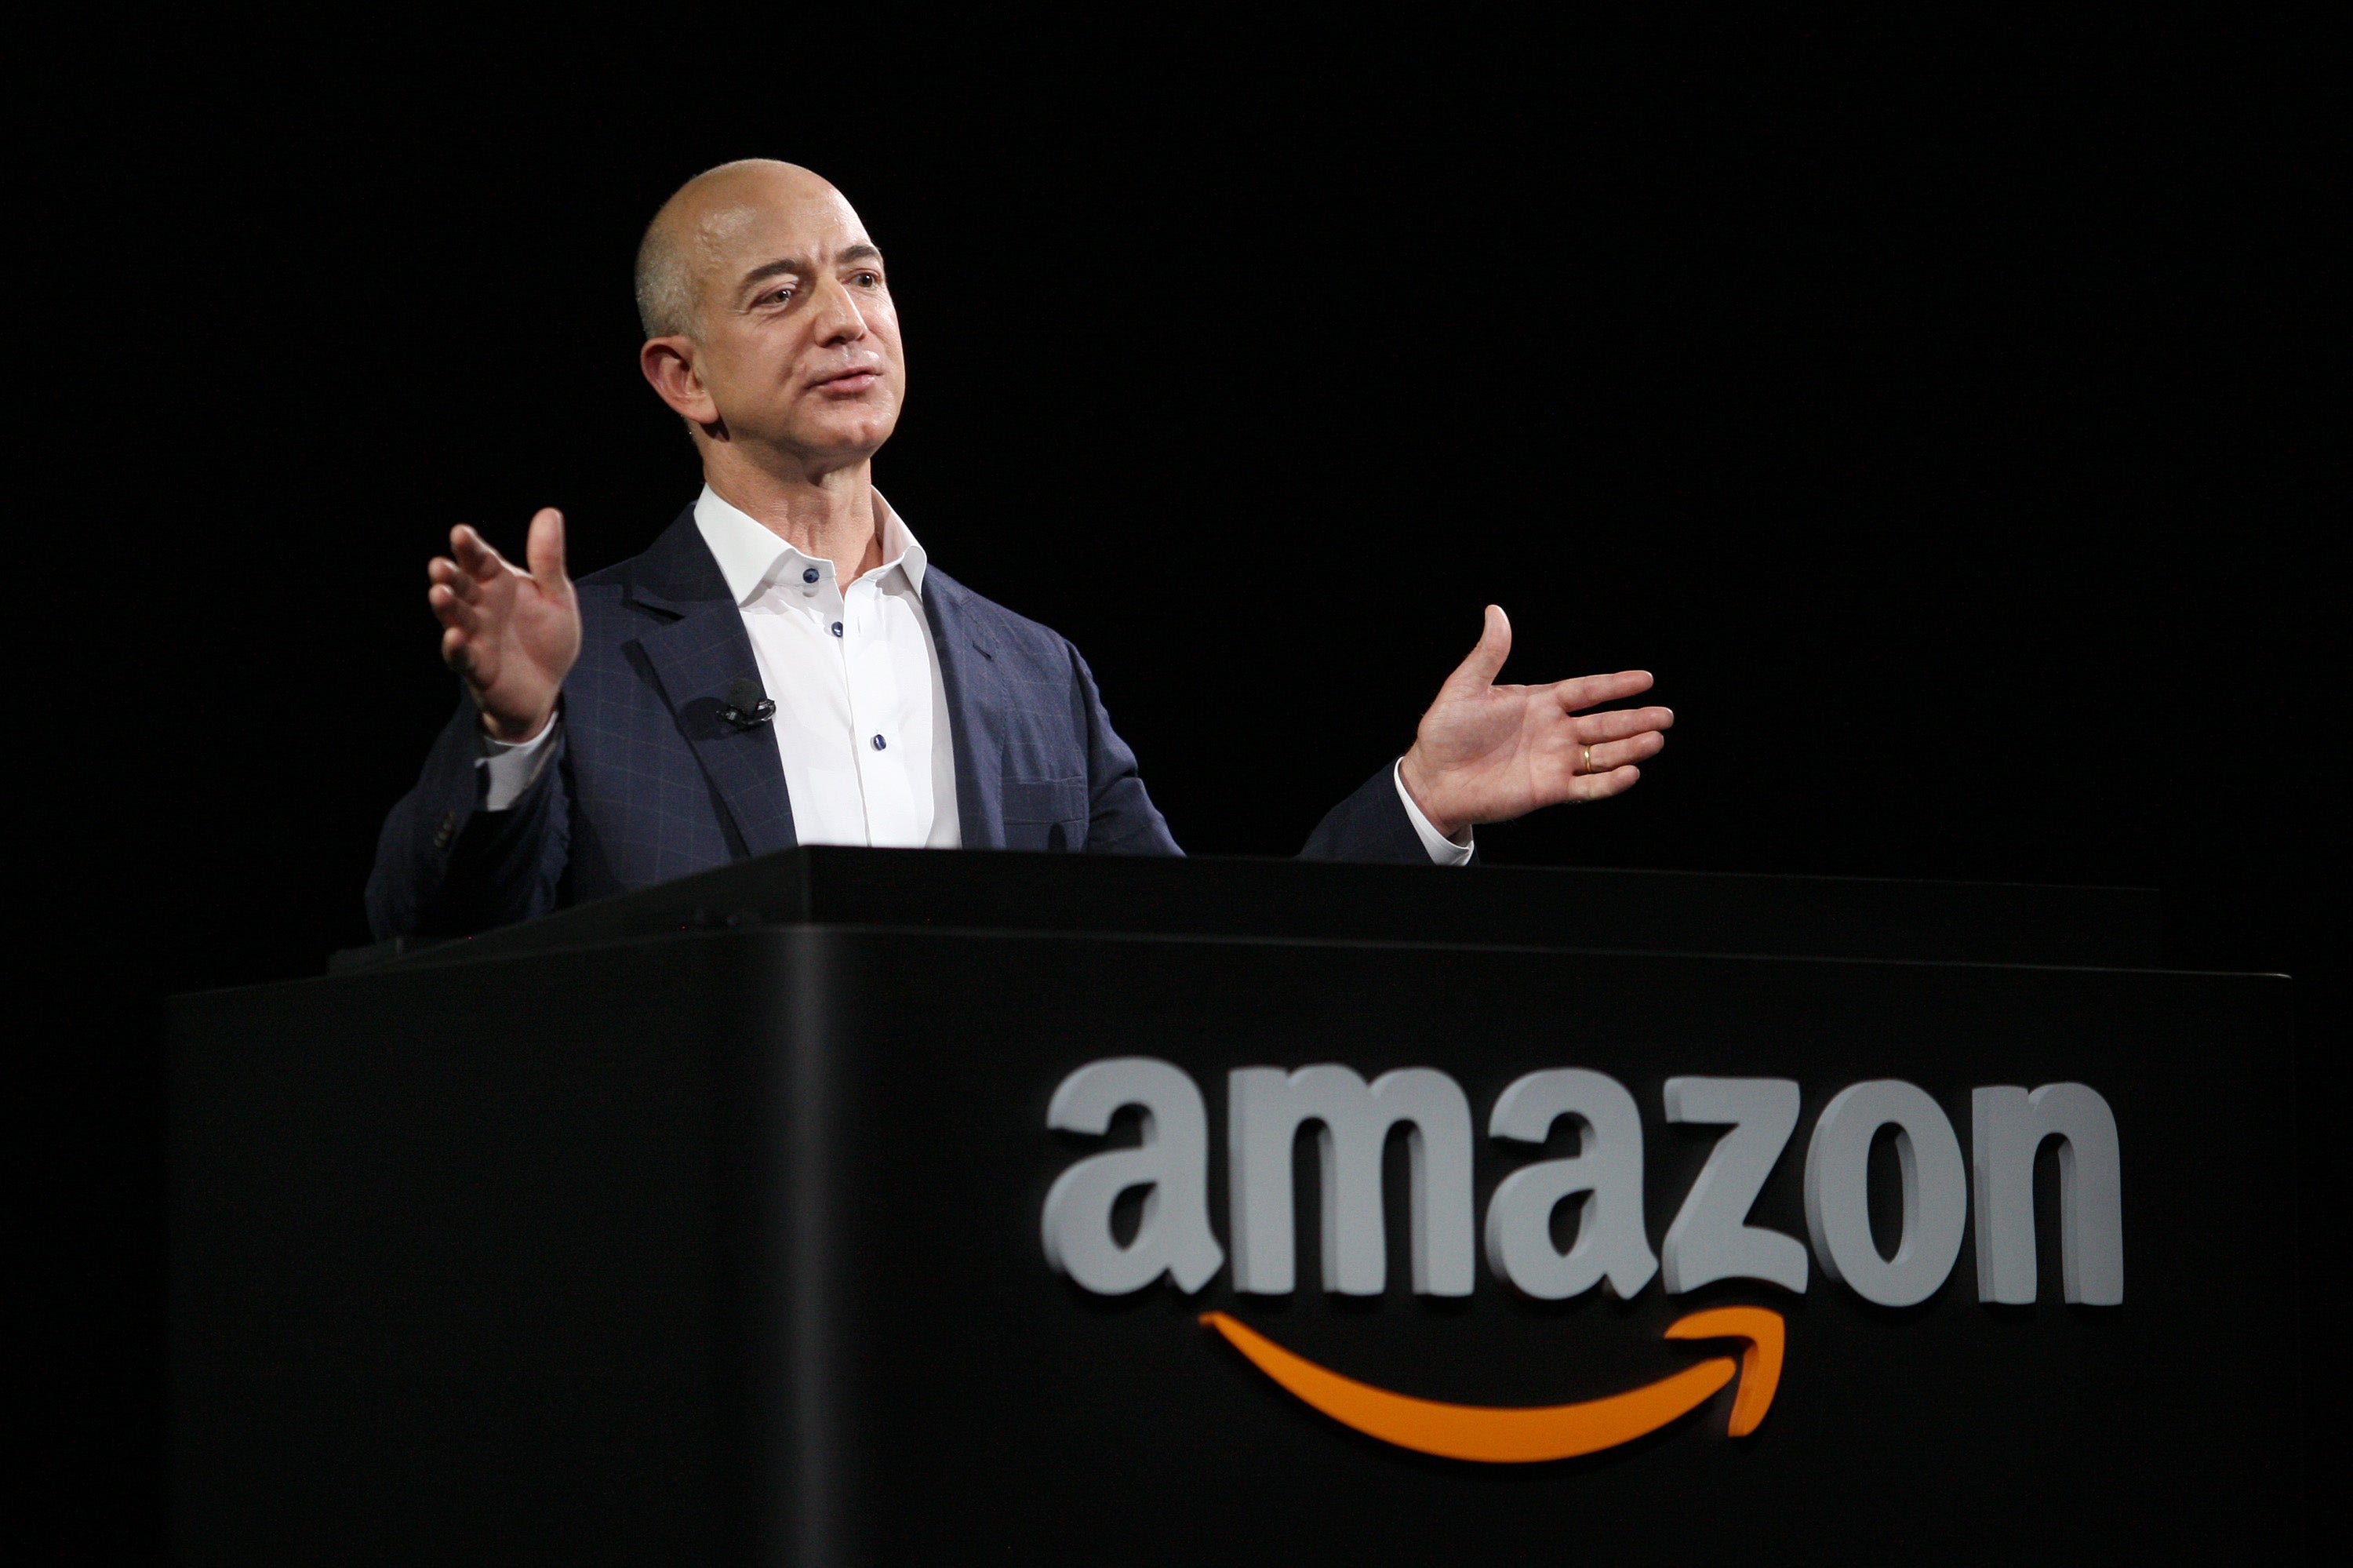 Bezos wants customers to feel “irresponsible” for not joining Prime.